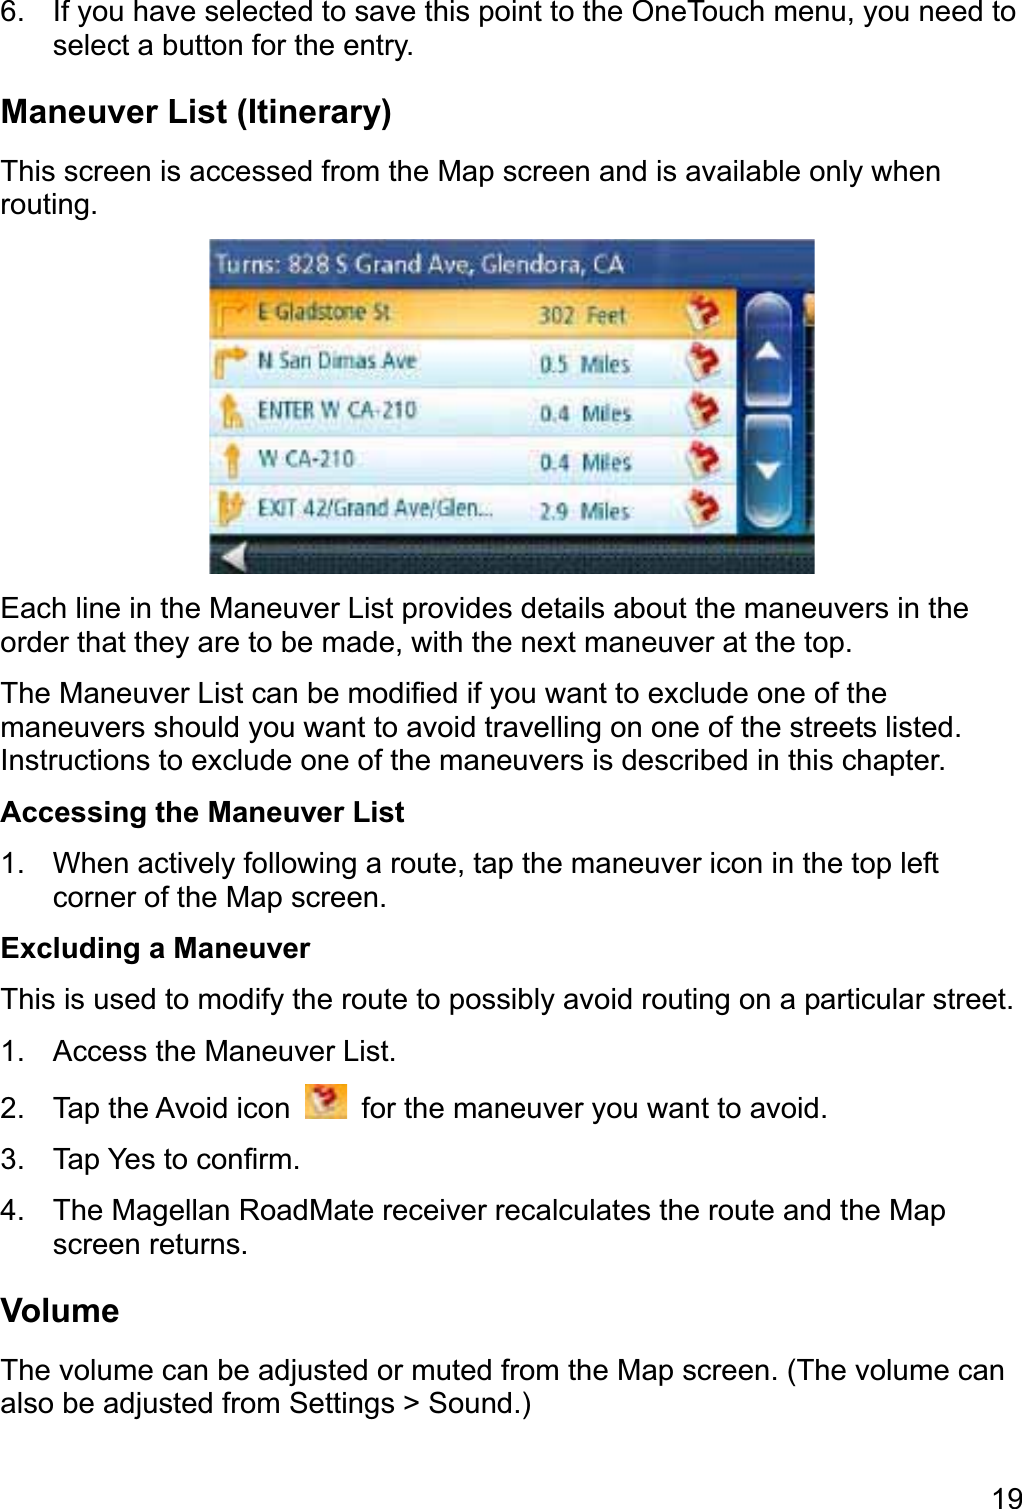 196.  If you have selected to save this point to the OneTouch menu, you need to select a button for the entry. Maneuver List (Itinerary) This screen is accessed from the Map screen and is available only when routing. Each line in the Maneuver List provides details about the maneuvers in the order that they are to be made, with the next maneuver at the top. The Maneuver List can be modified if you want to exclude one of the maneuvers should you want to avoid travelling on one of the streets listed. Instructions to exclude one of the maneuvers is described in this chapter. Accessing the Maneuver List 1.  When actively following a route, tap the maneuver icon in the top left corner of the Map screen. Excluding a Maneuver This is used to modify the route to possibly avoid routing on a particular street. 1.  Access the Maneuver List. 2.  Tap the Avoid icon    for the maneuver you want to avoid. 3.  Tap Yes to confirm. 4.  The Magellan RoadMate receiver recalculates the route and the Map screen returns. Volume The volume can be adjusted or muted from the Map screen. (The volume can also be adjusted from Settings &gt; Sound.) 